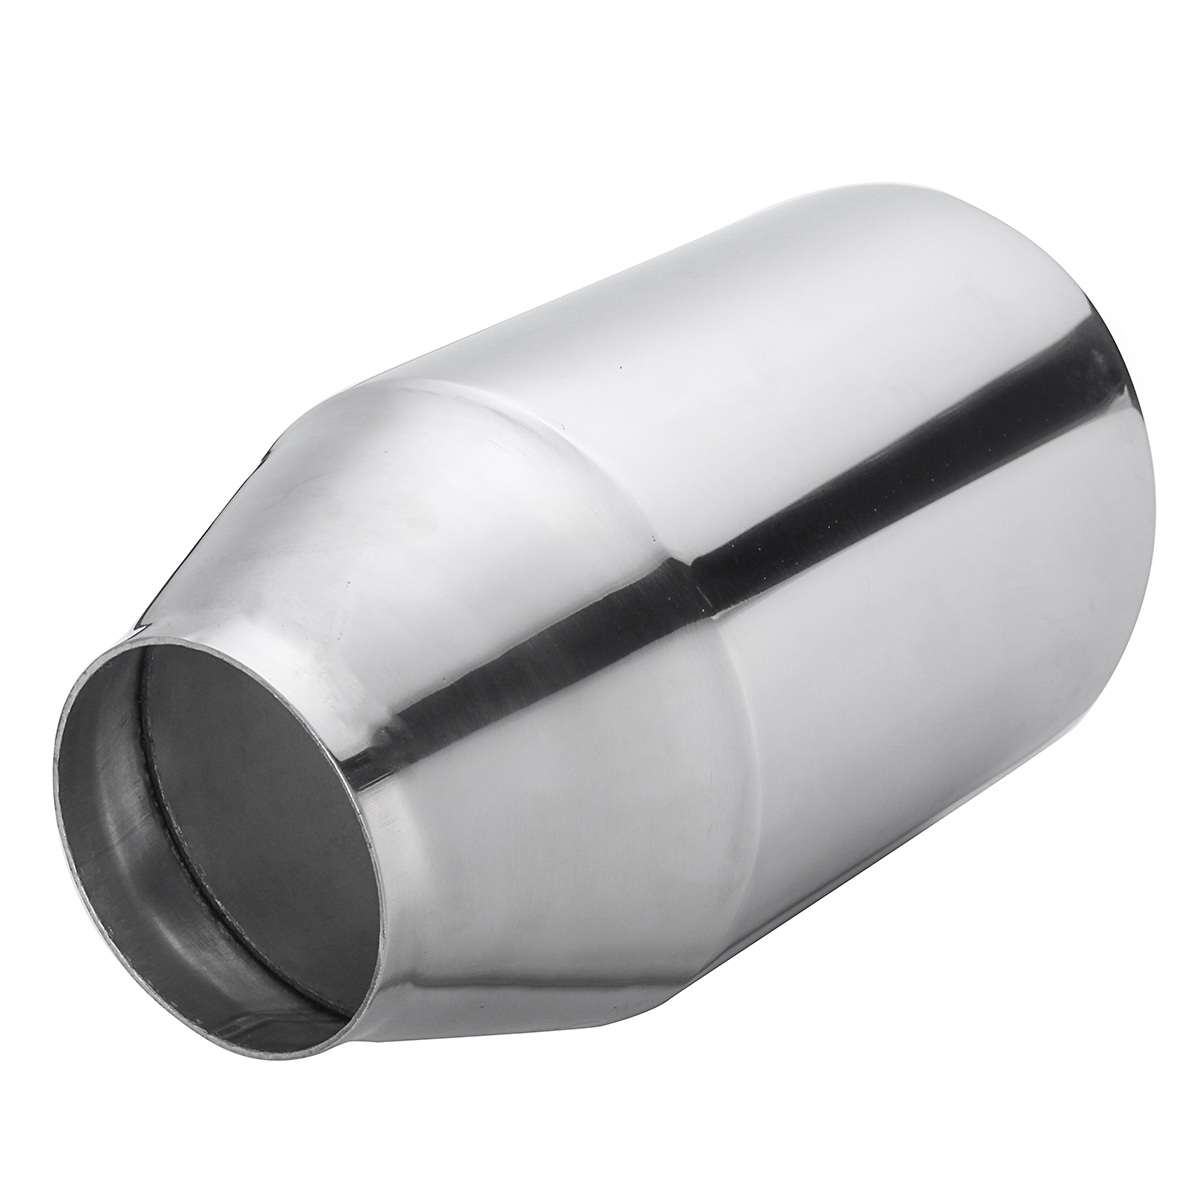 Universal Stainless Steel Exhaust Muffler Double Wall round Slant 2.5 Inch Inelt 4 Inch Outlet